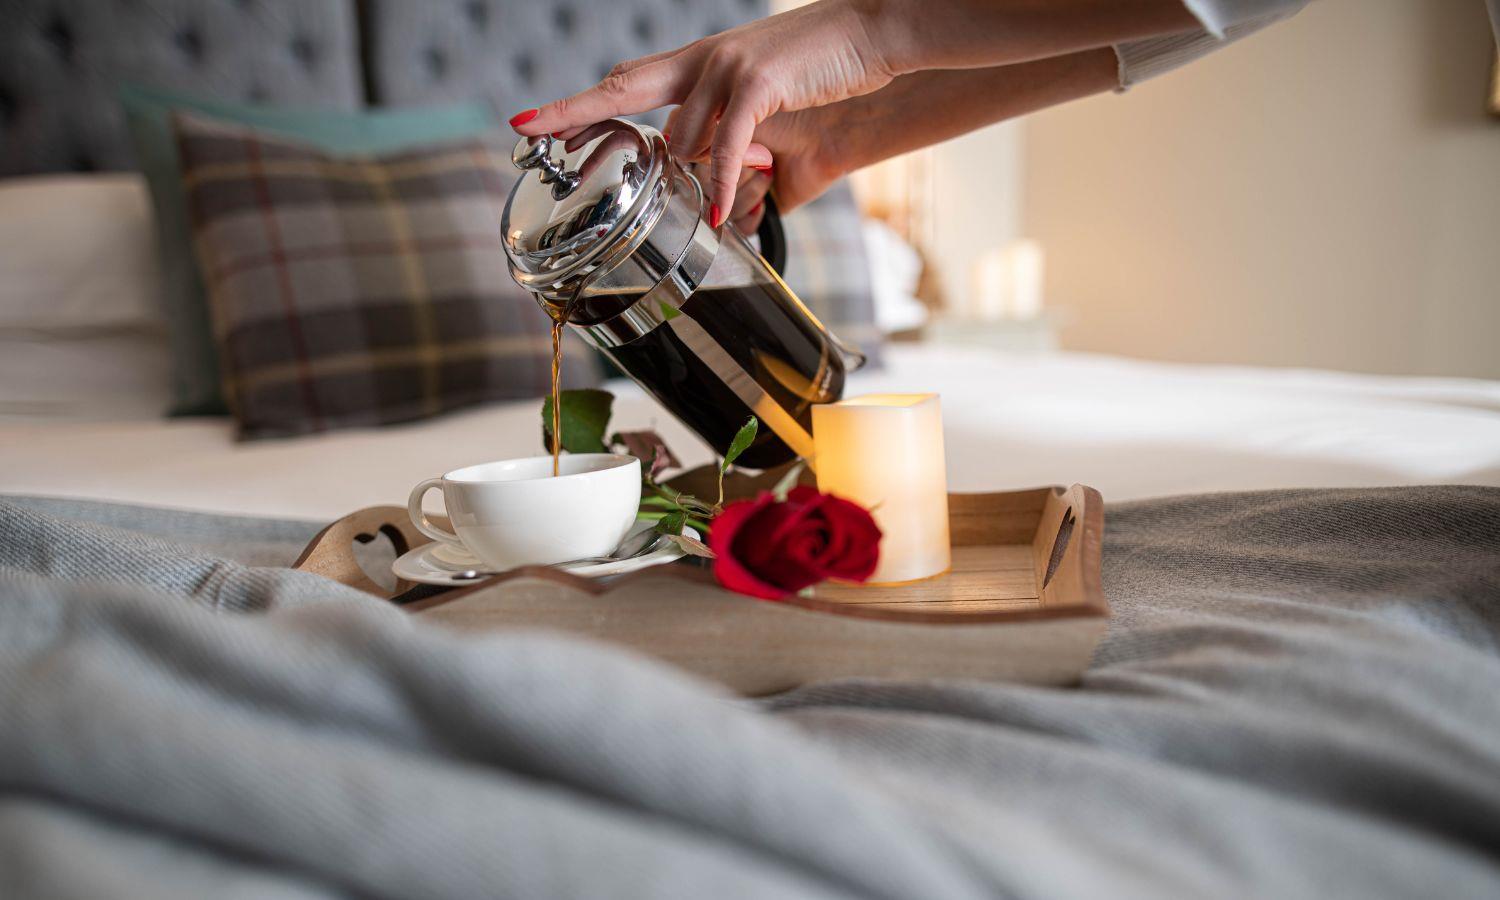 Woman pouring coffee into a cup on a tray with a lit candle and red rose